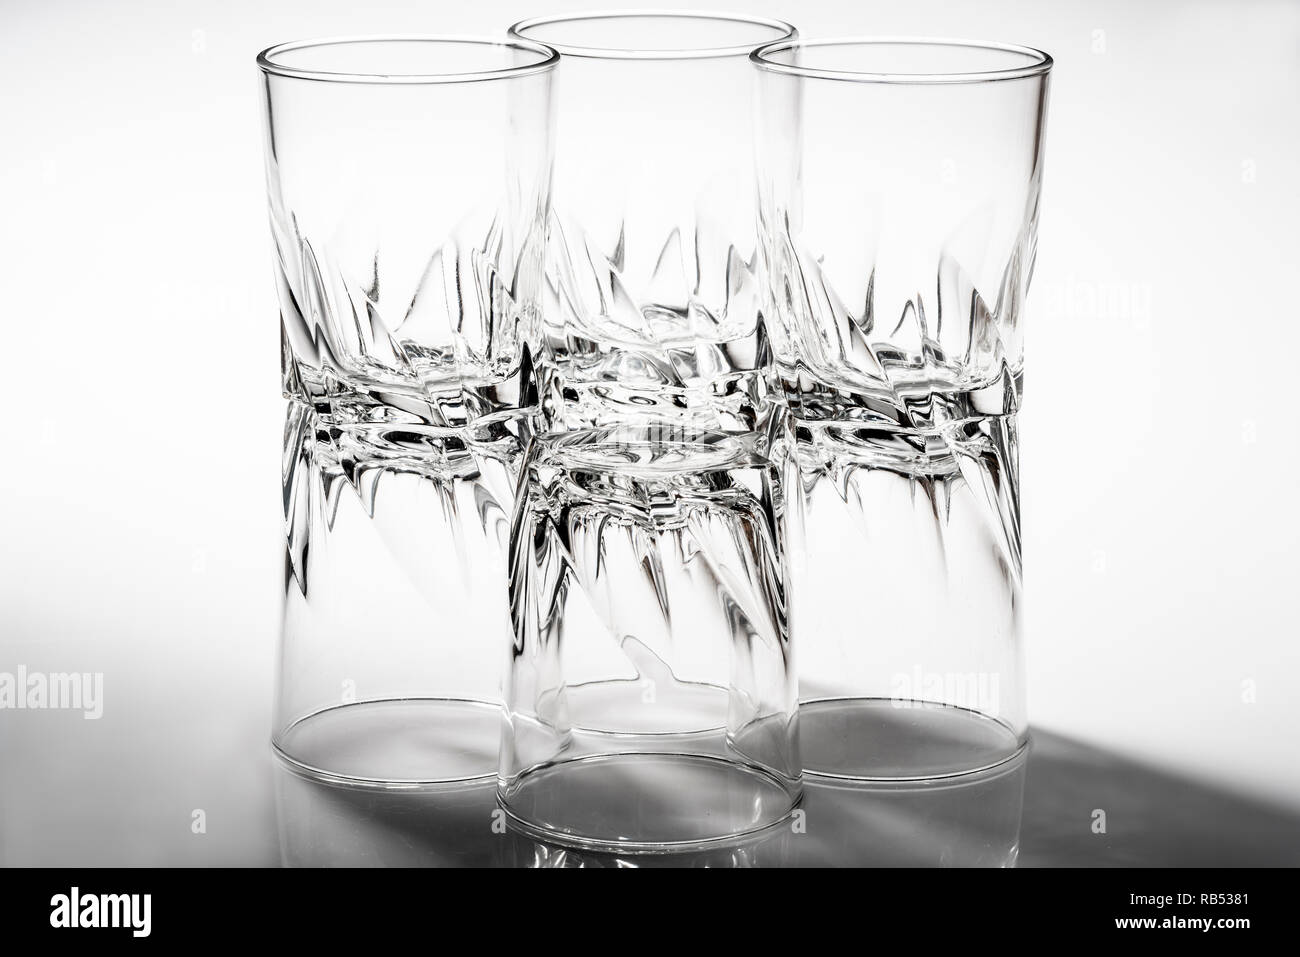 Group of glass tumblers with a heavy, chunky design. Stock Photo